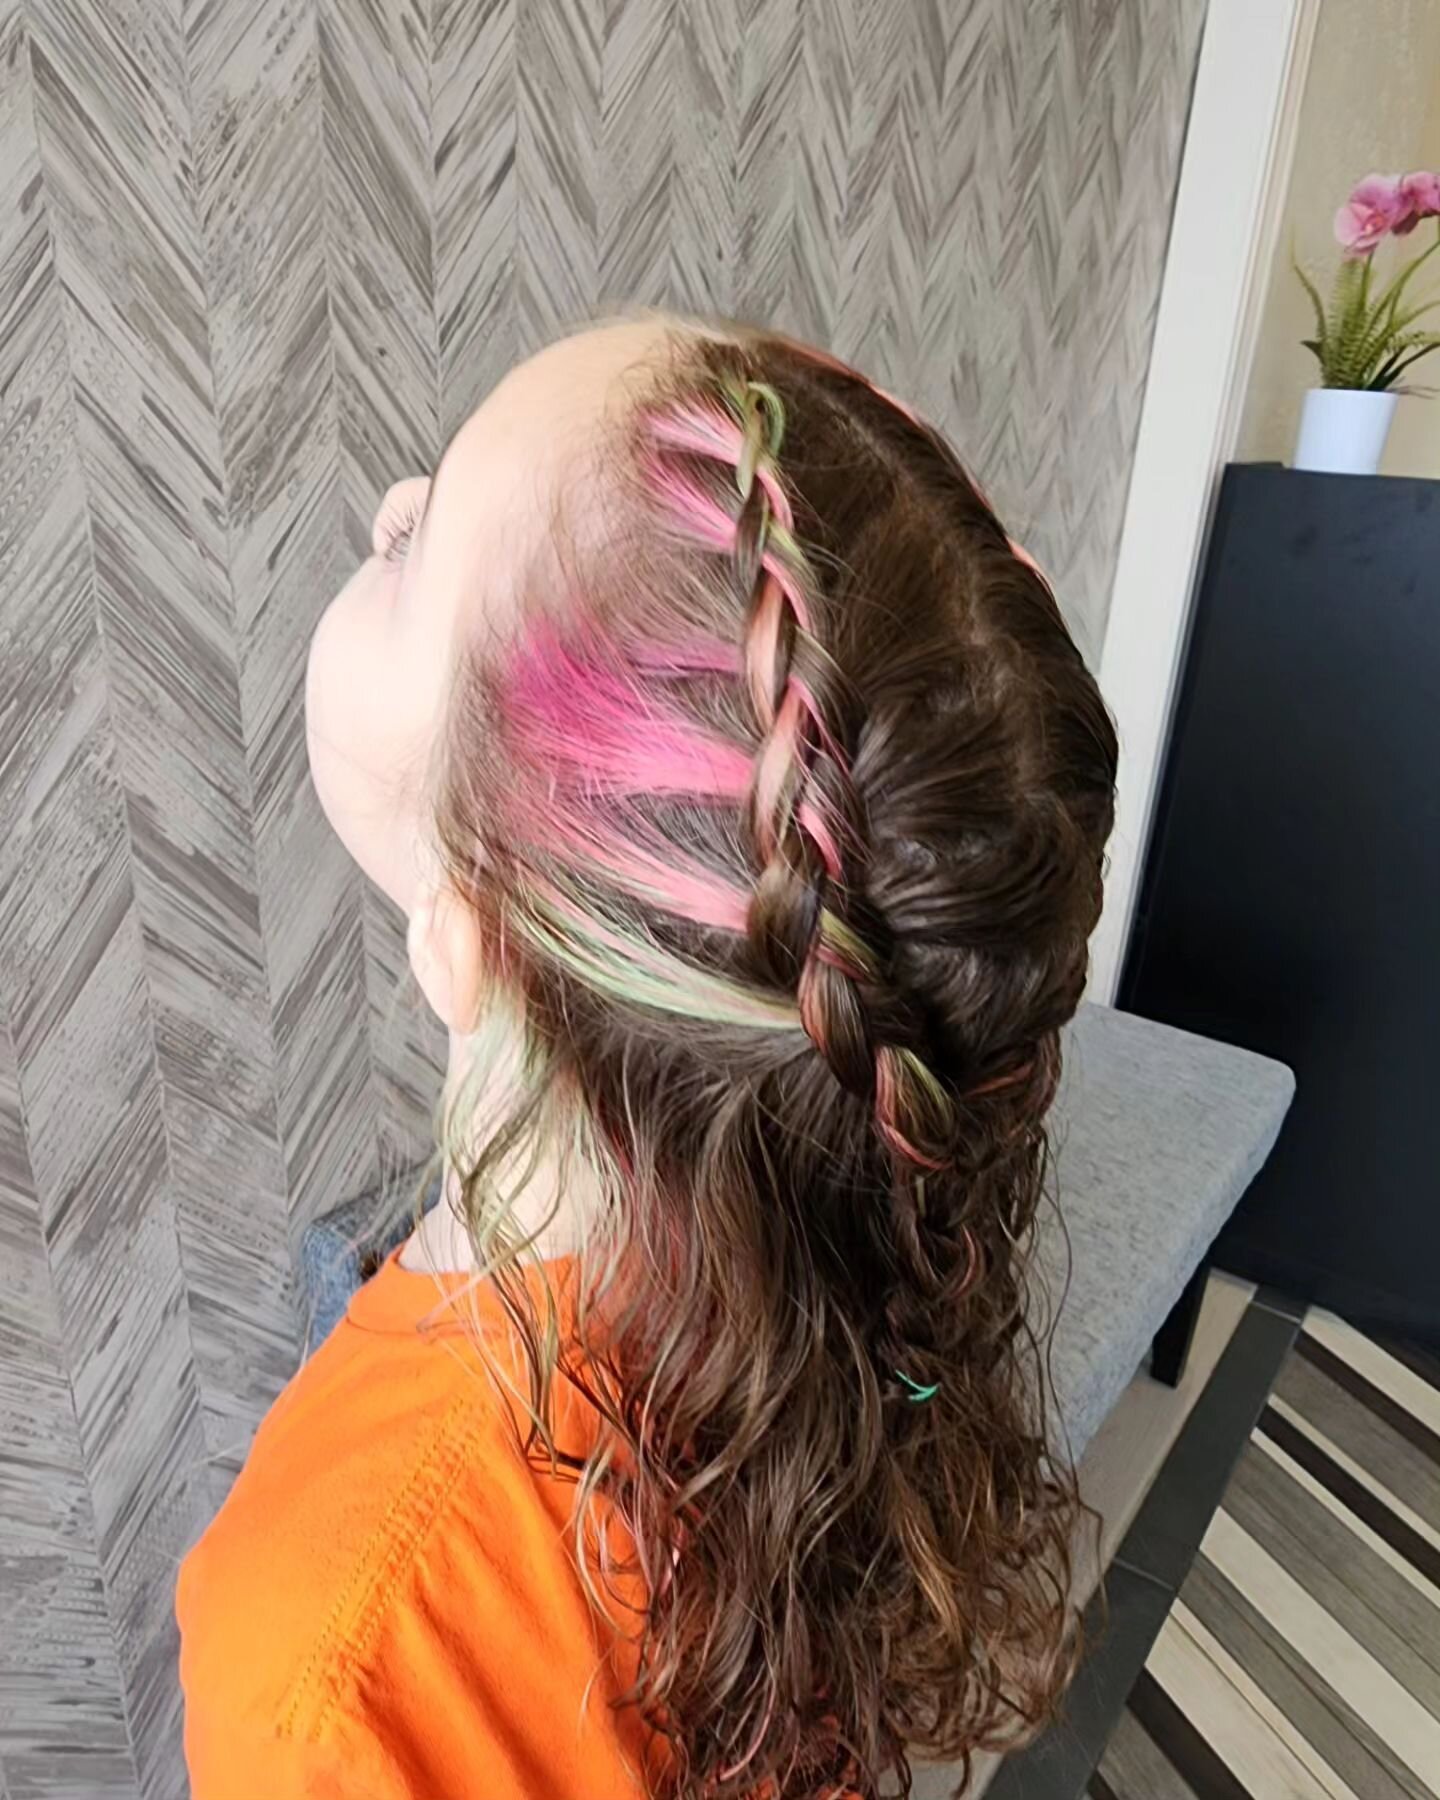 Happy to do Laras fun spring colors and some braids 🌷💐